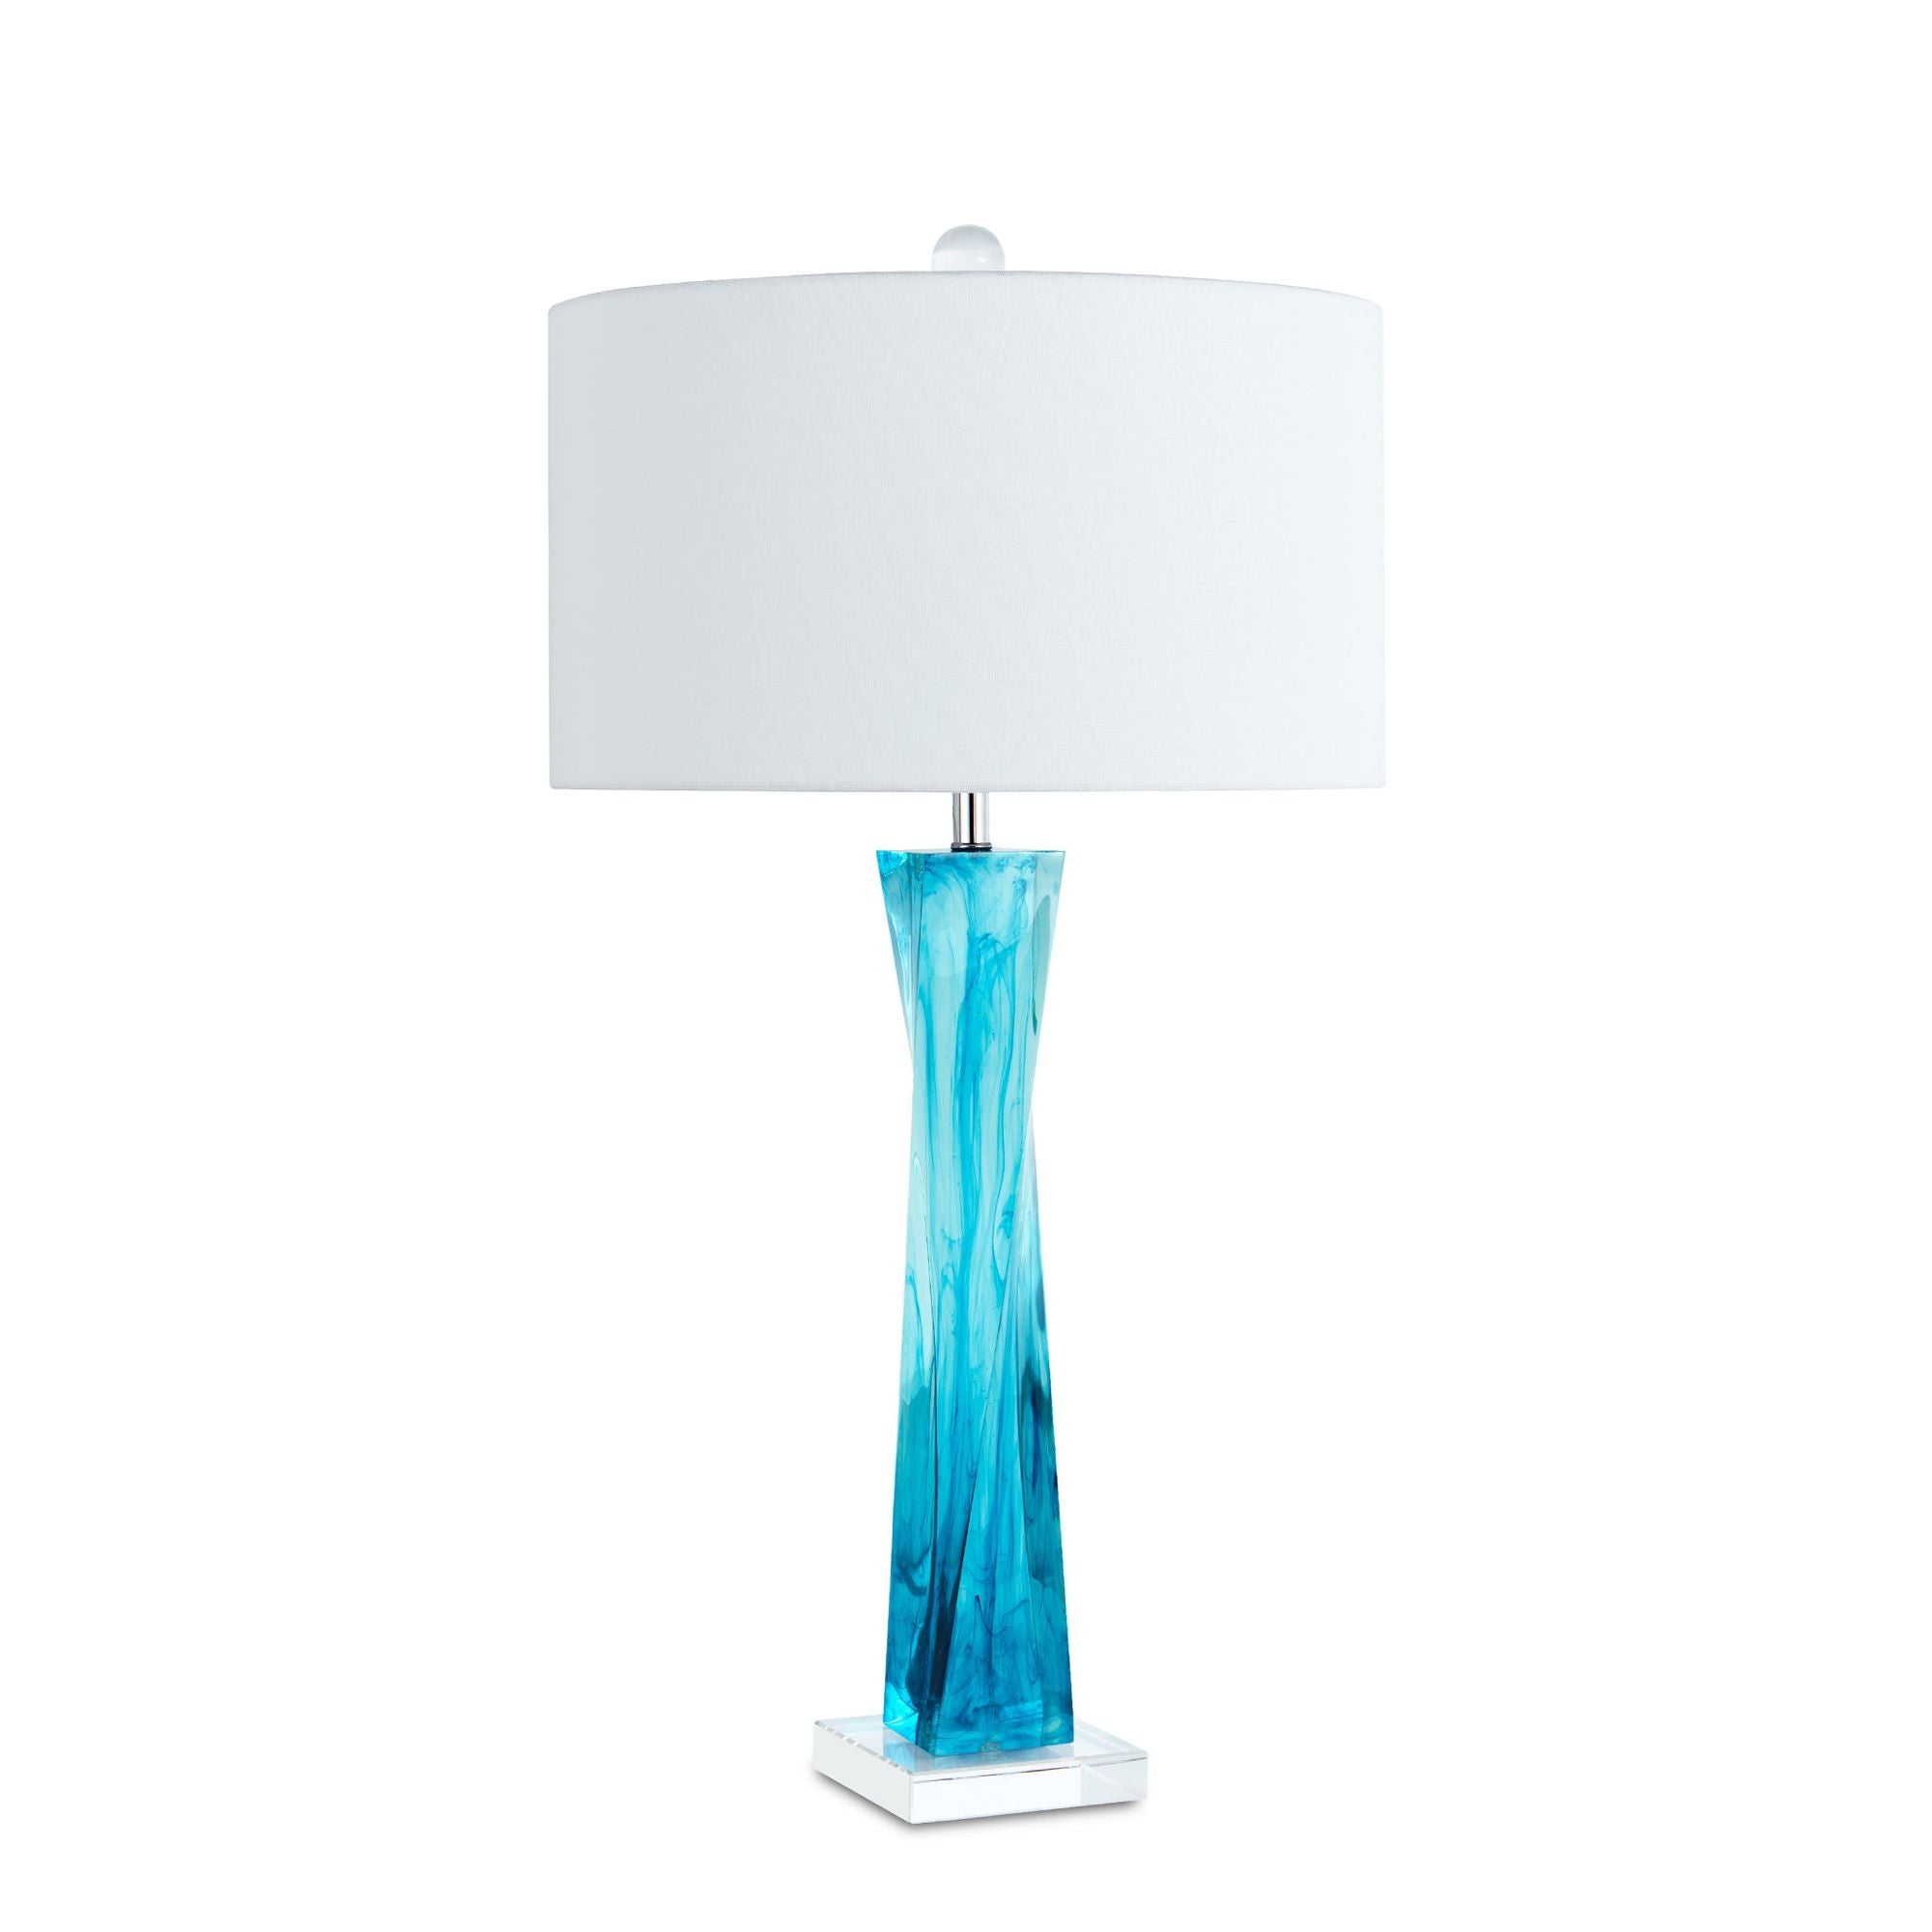 Chatto Blue Table Lamp - Transparent Blue